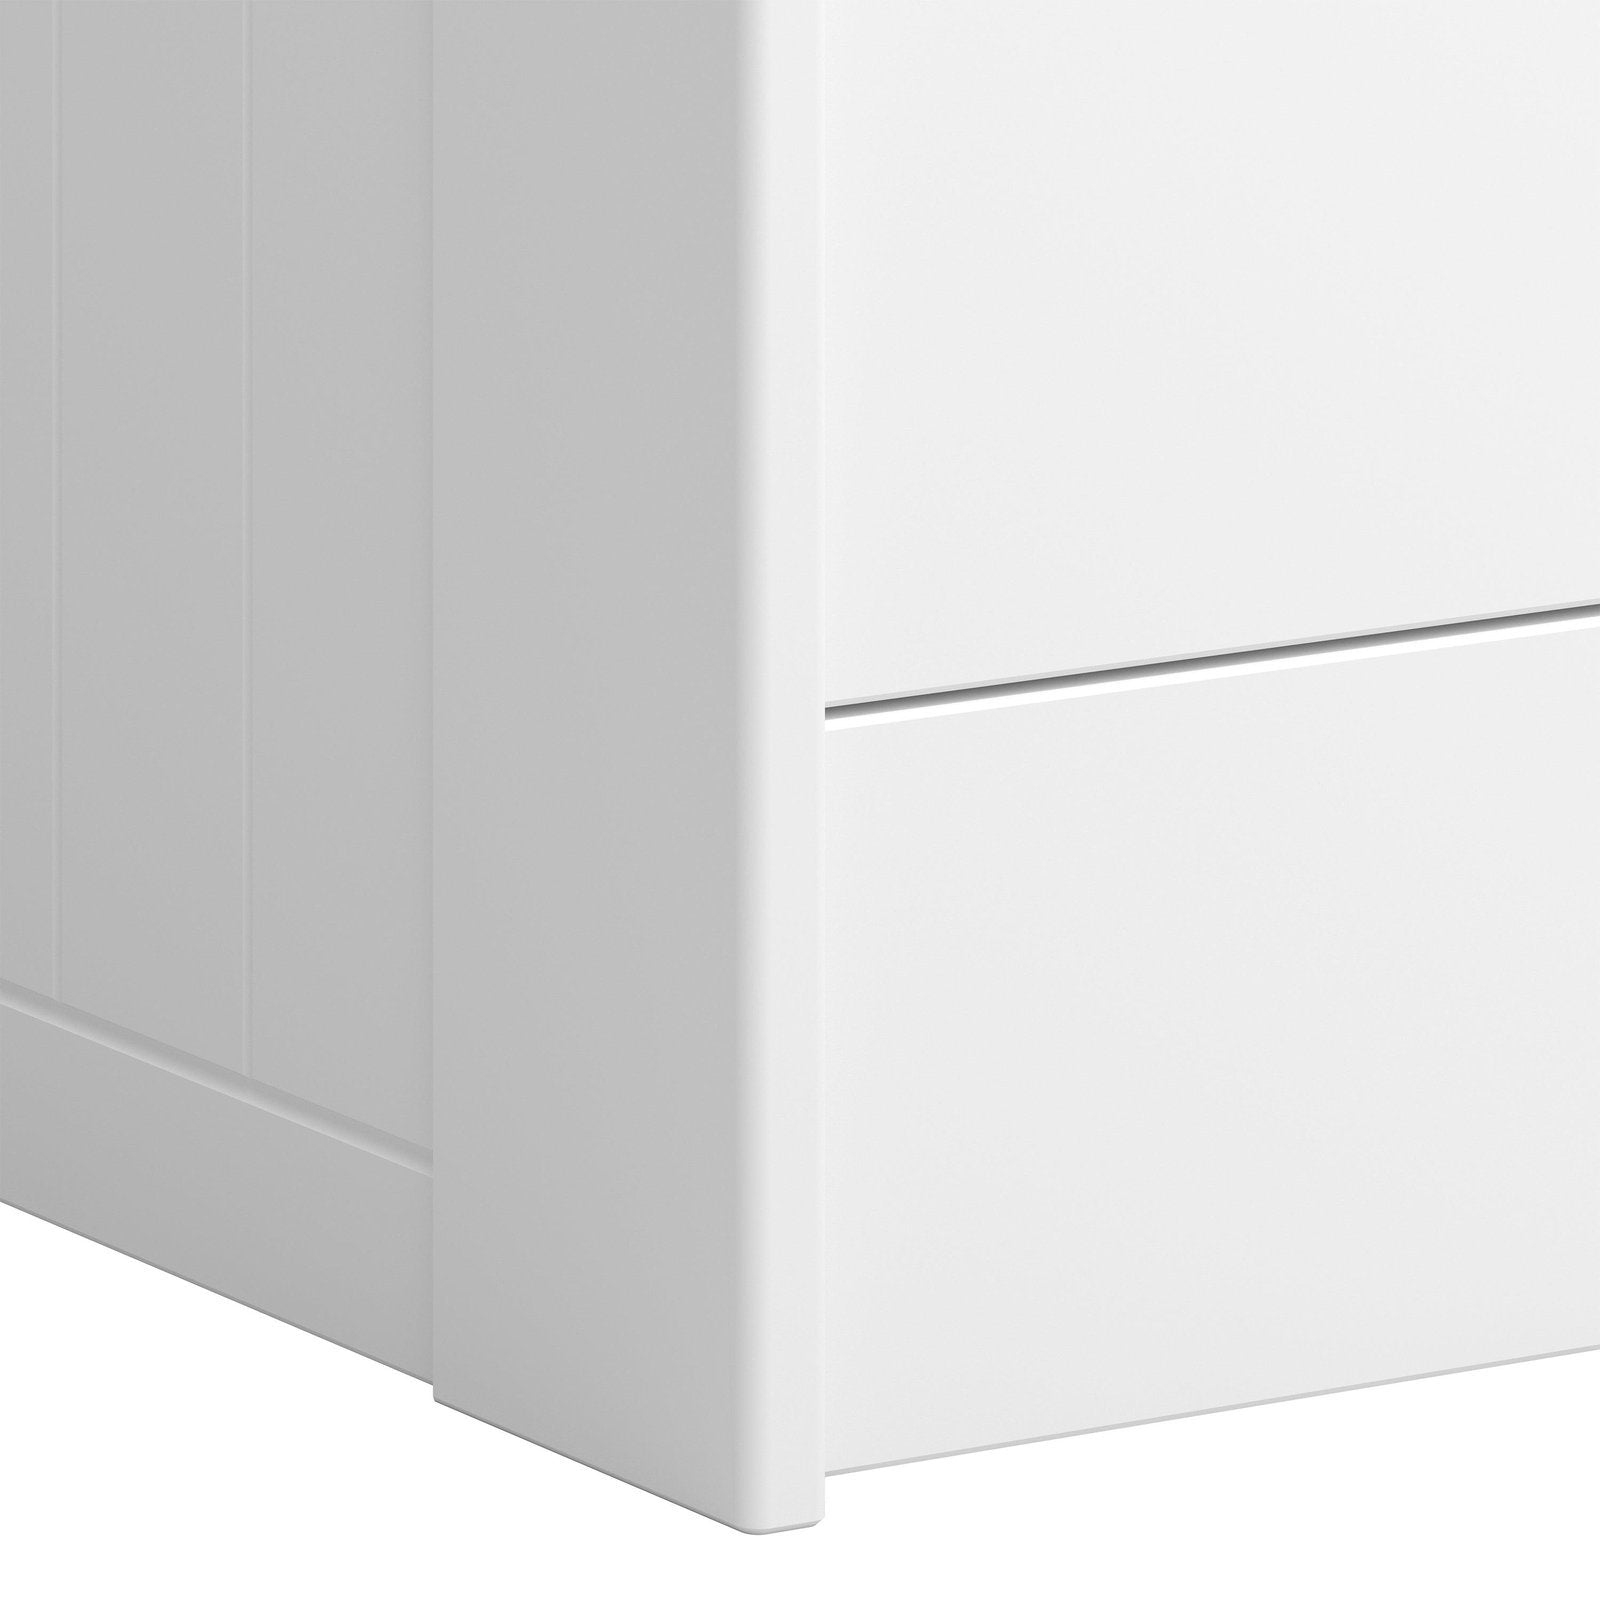 Steens Alba White Single Bed - Space Efficient Design - Solid White MDF